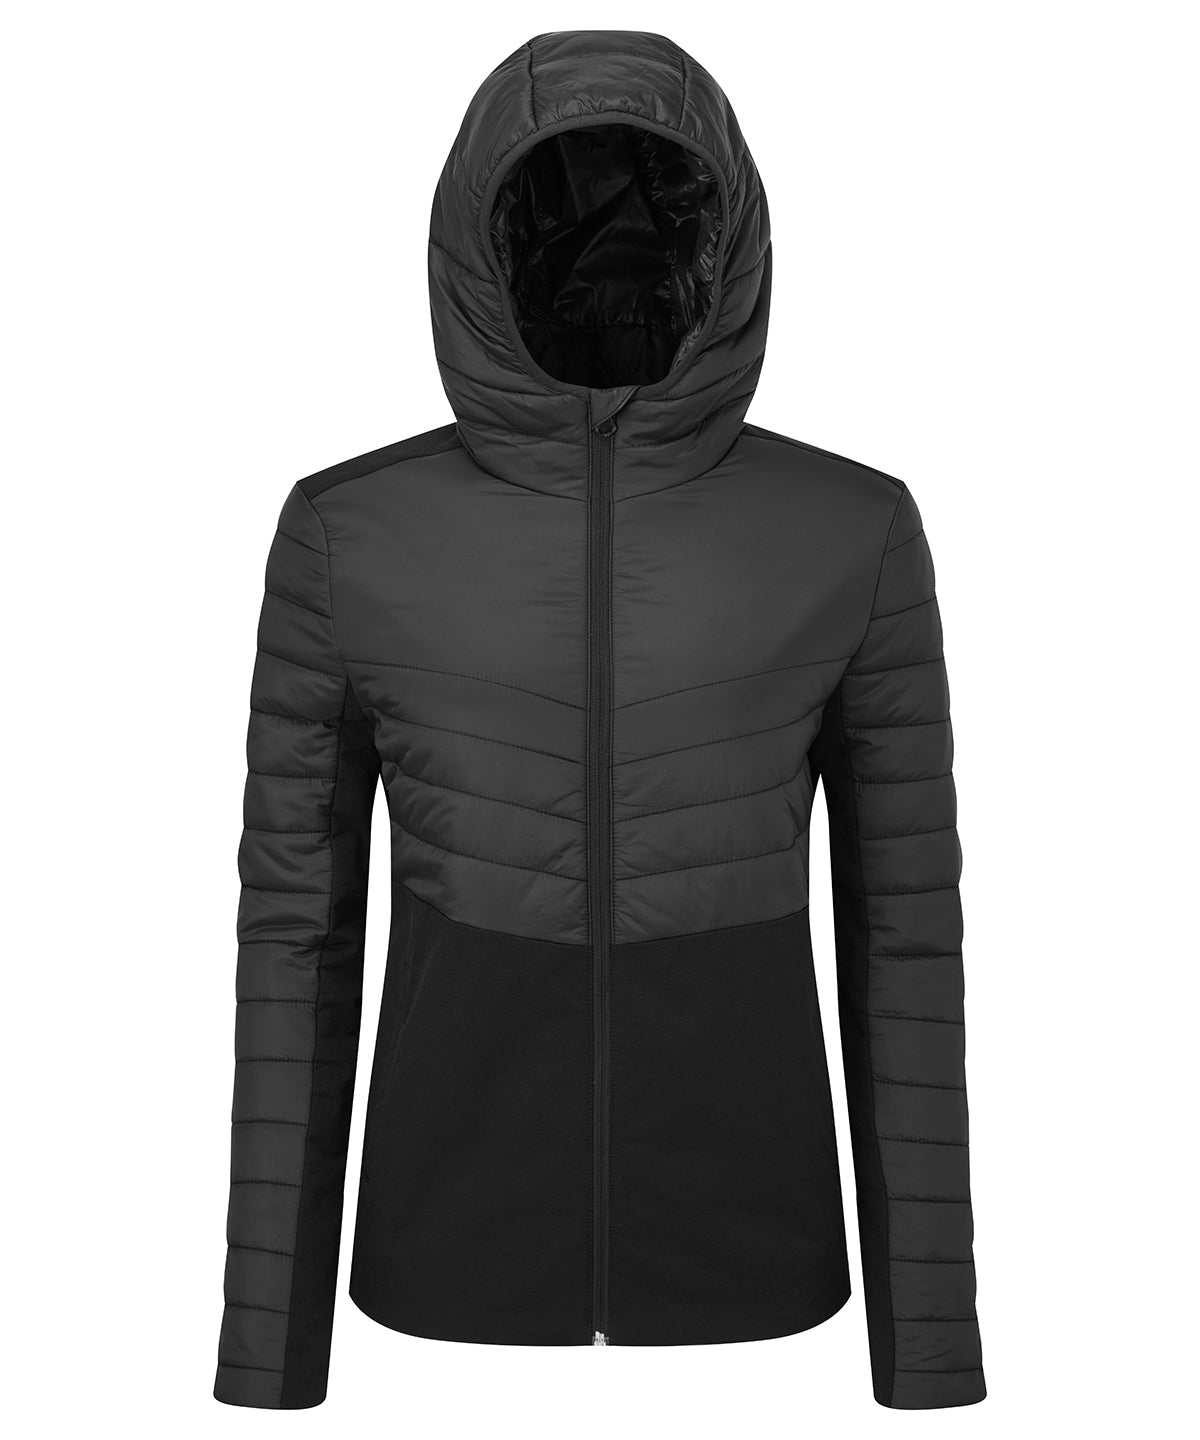 Black - Women's TriDri® insulated hybrid jacket Jackets TriDri® Conscious cold weather styles, Exclusives, Jackets & Coats, New For 2021, New In Autumn Winter, New In Mid Year, Padded & Insulation, Softshells, Women's Fashion Schoolwear Centres